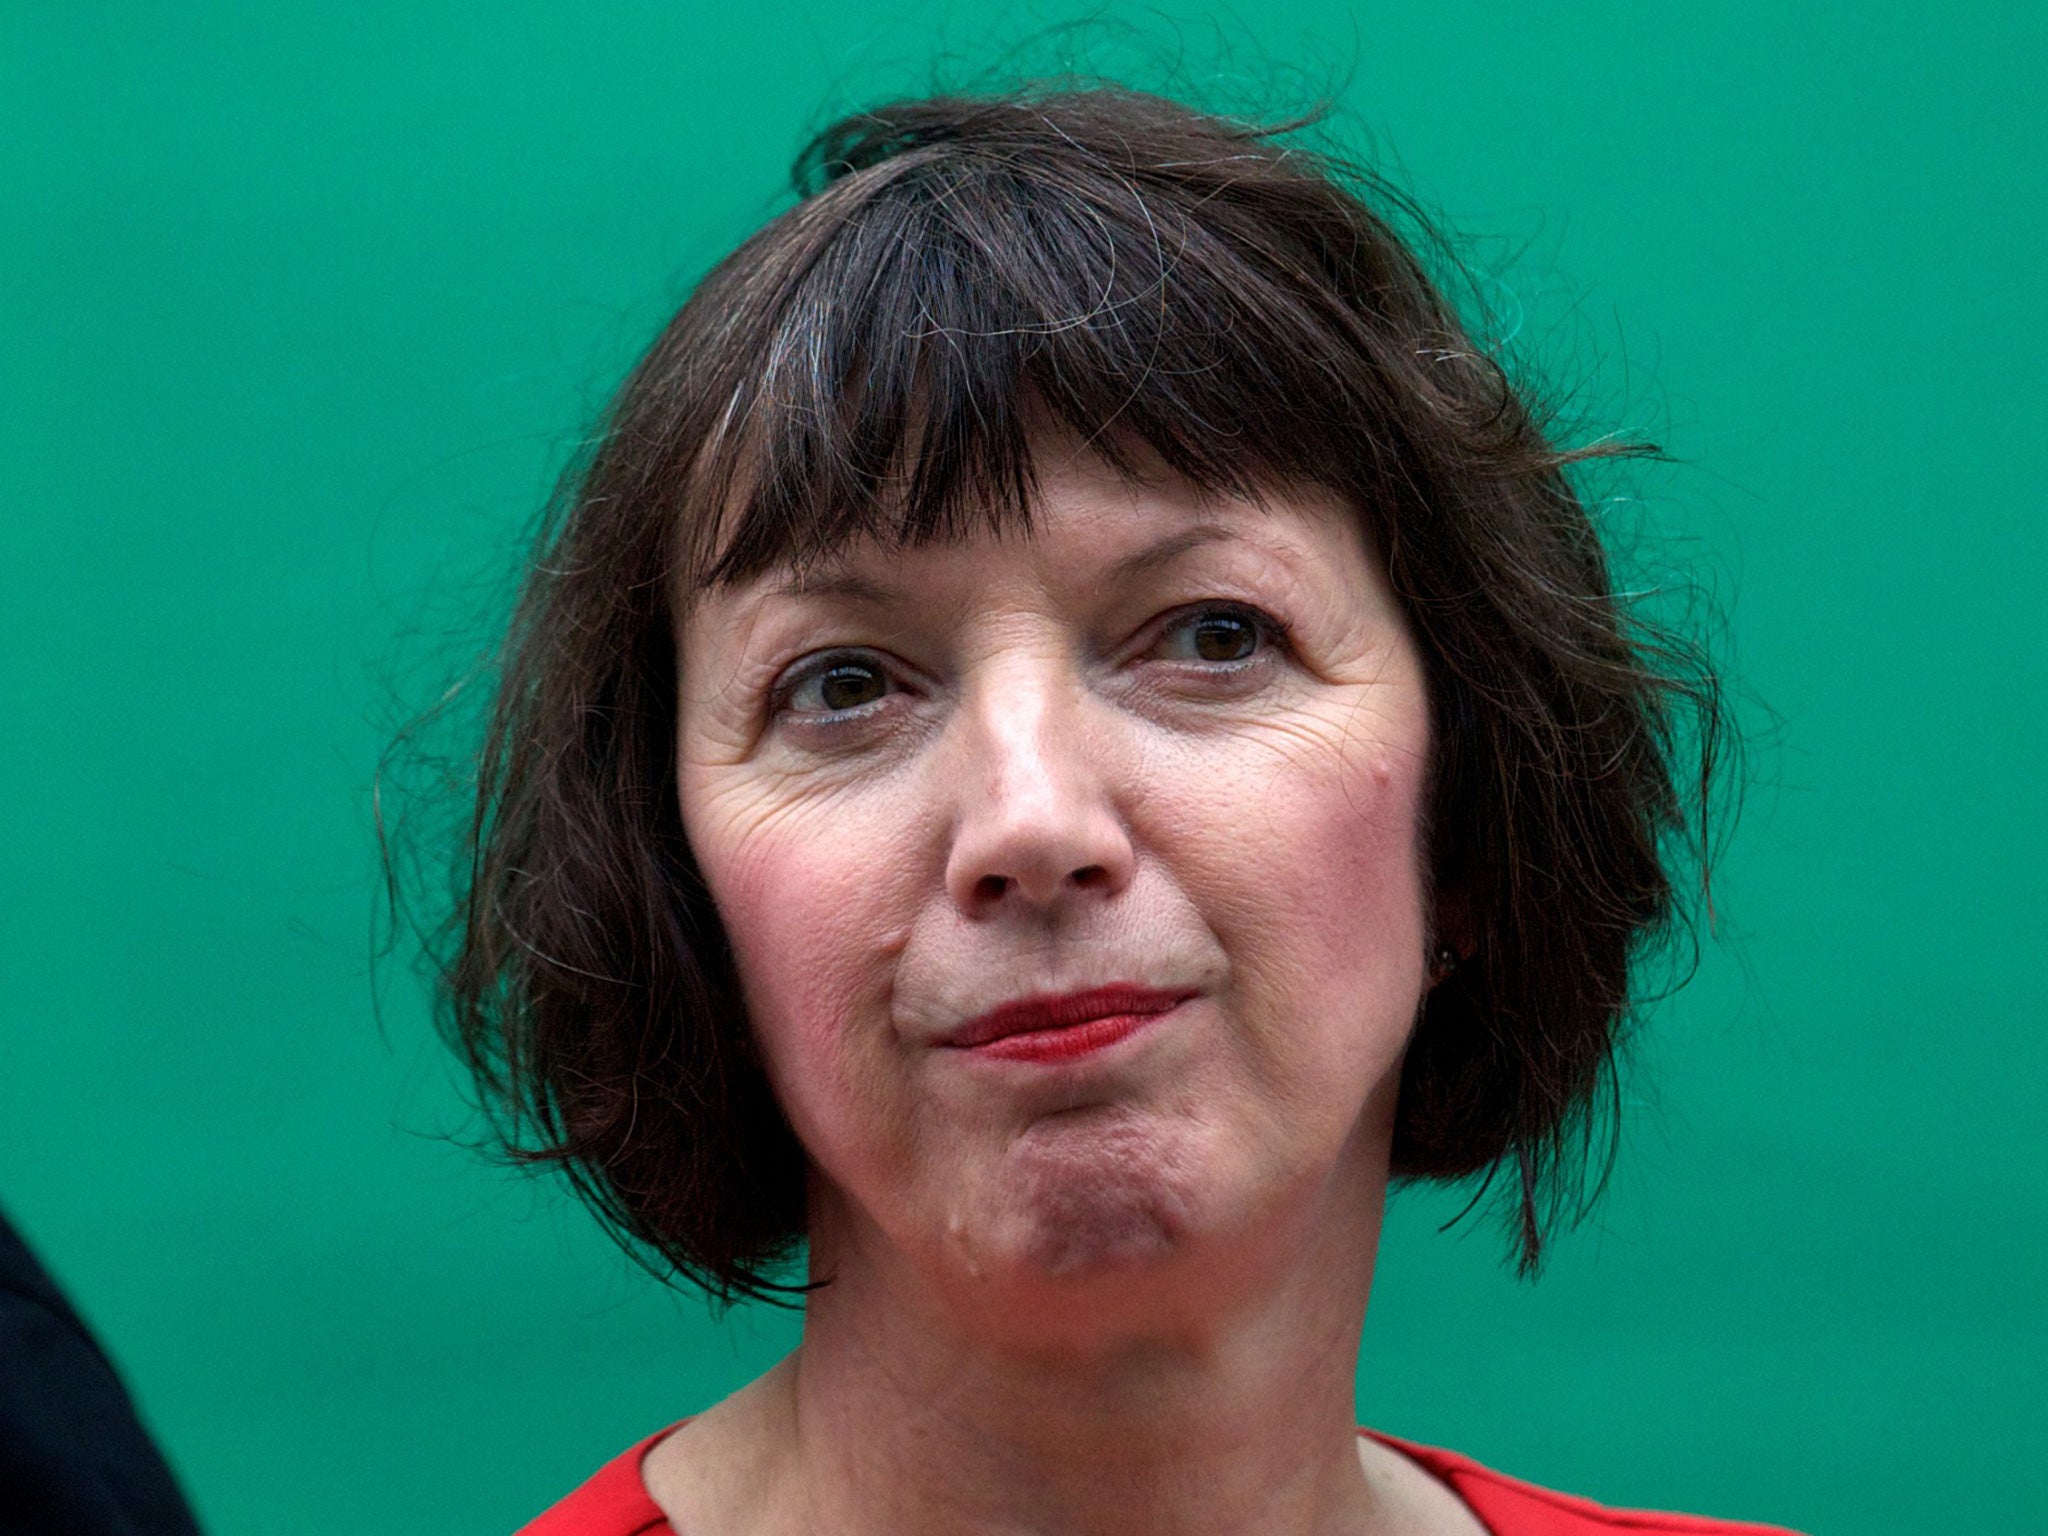 TUC chief Frances O’Grady said one in six steelworkers faces redundancy